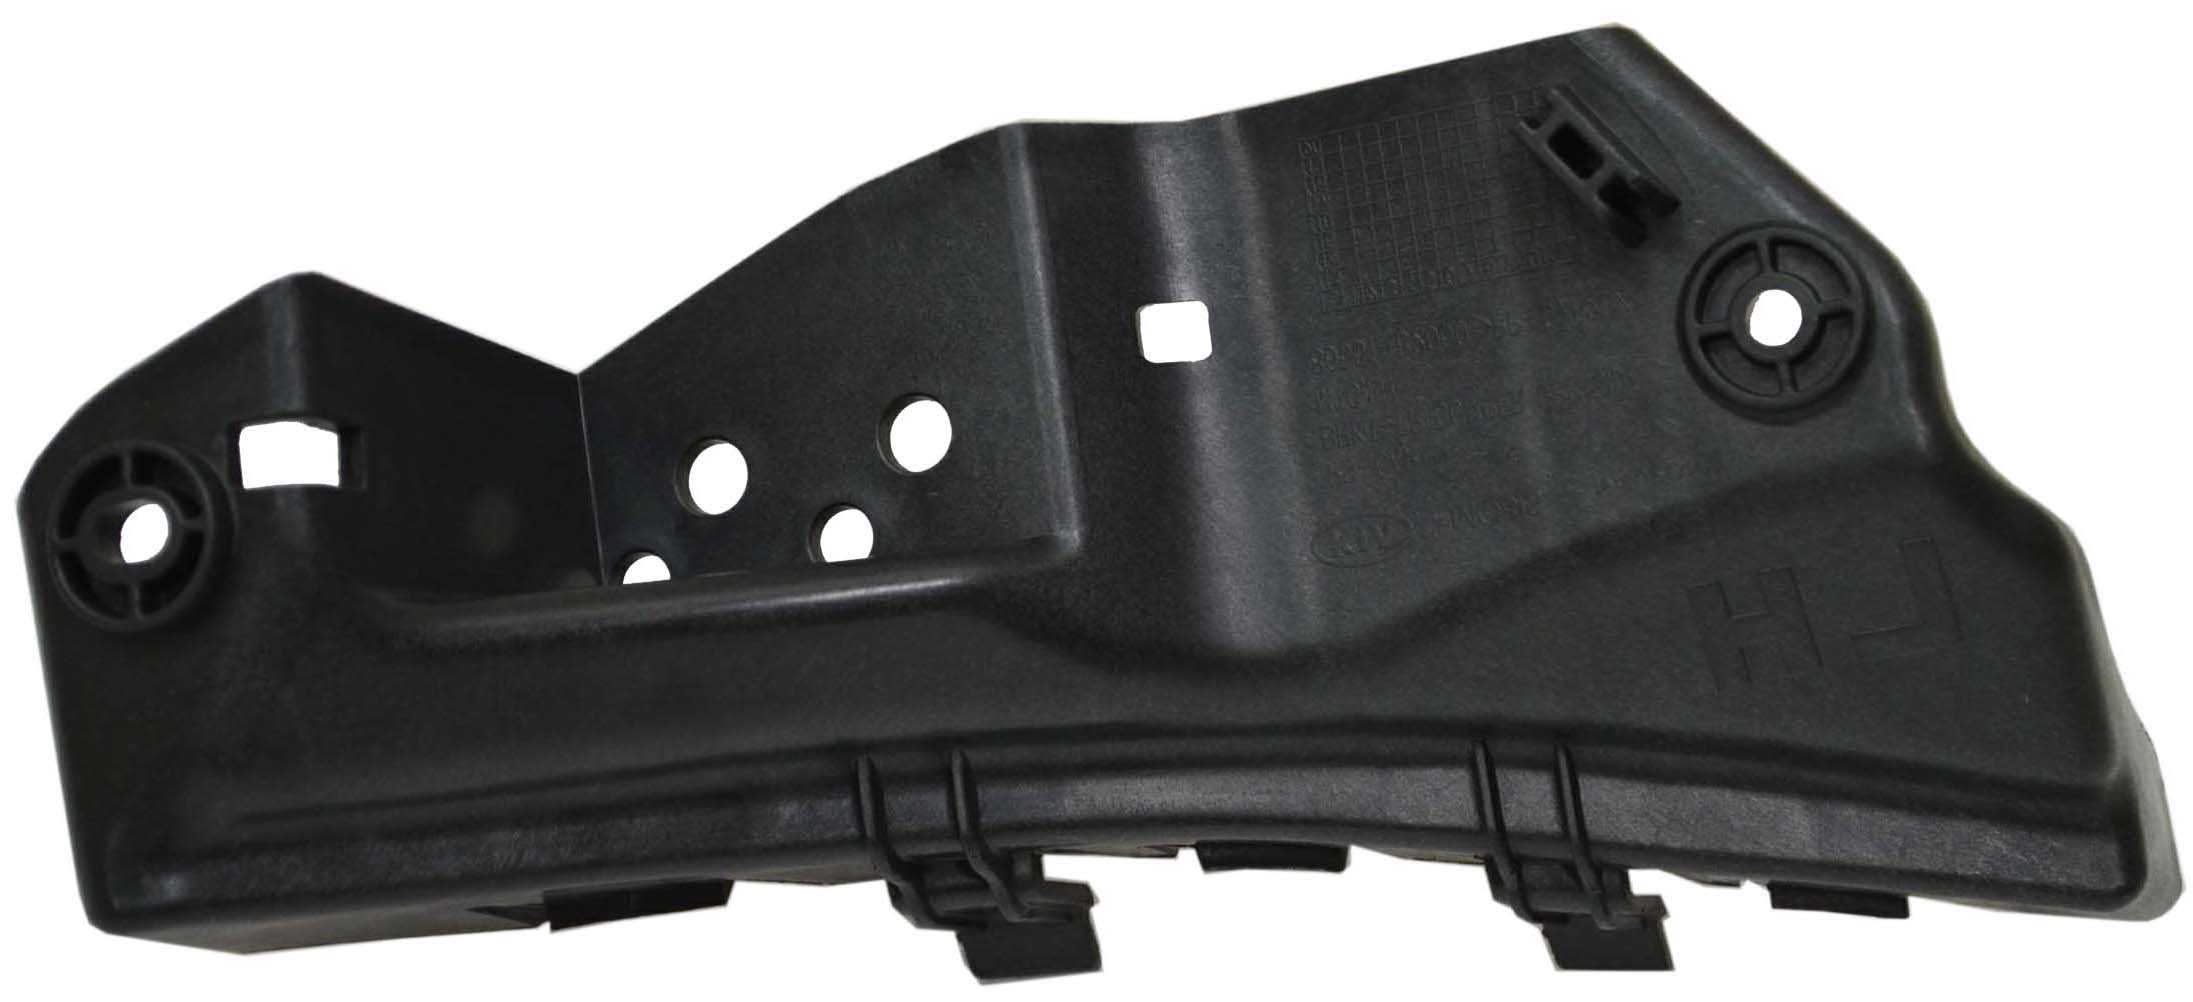 Aftermarket BRACKETS for KIA - SOUL, SOUL,14-19,RT Front bumper cover retainer